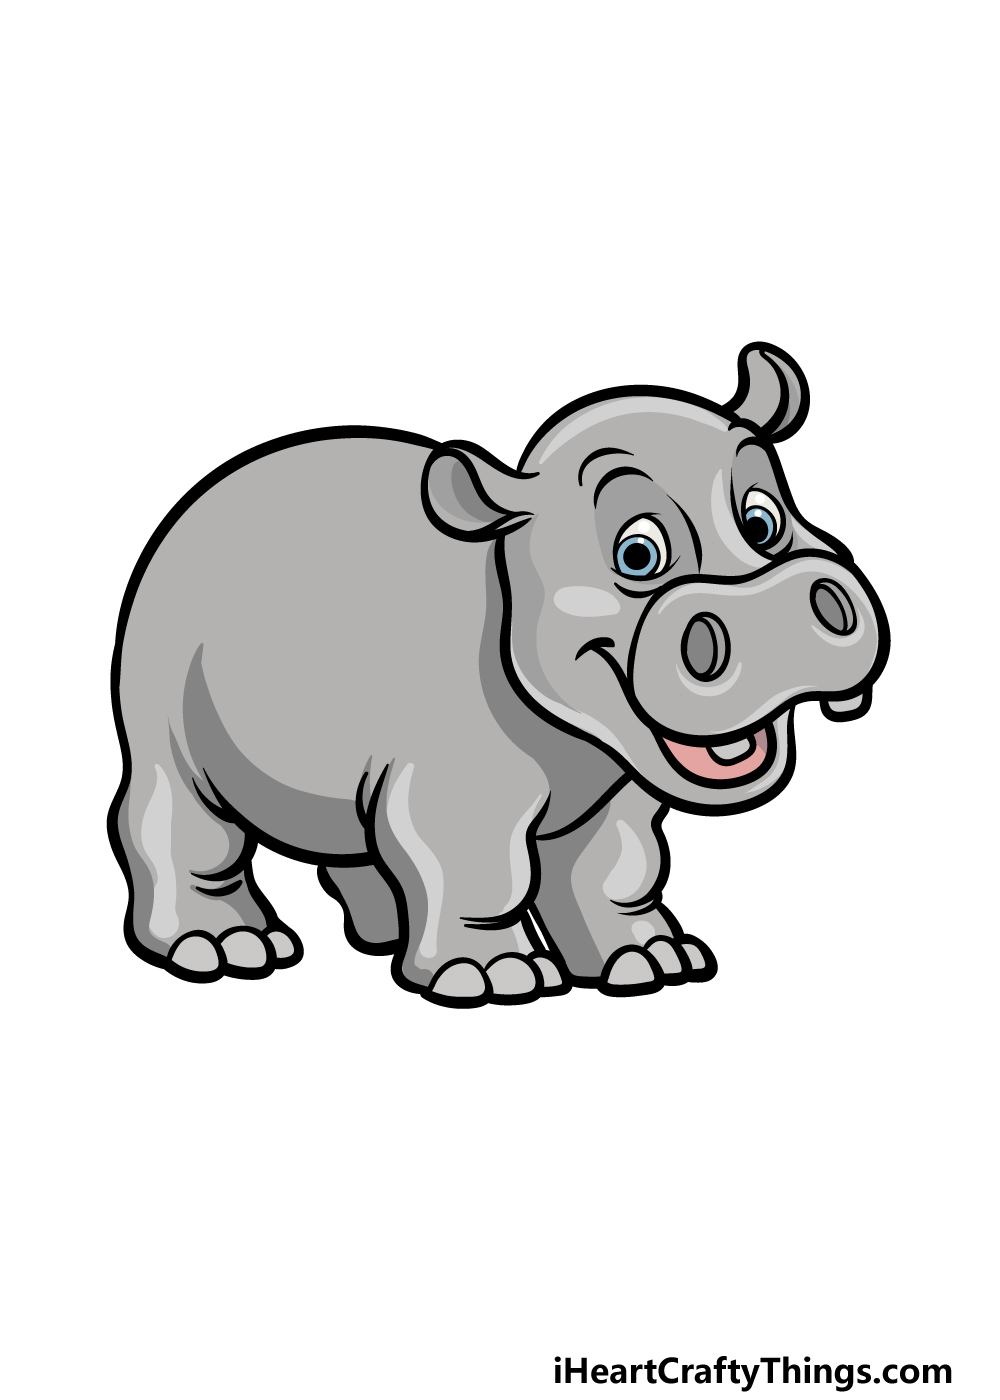 Cartoon Hippo Drawing - How To Draw A Cartoon Hippo Step By Step